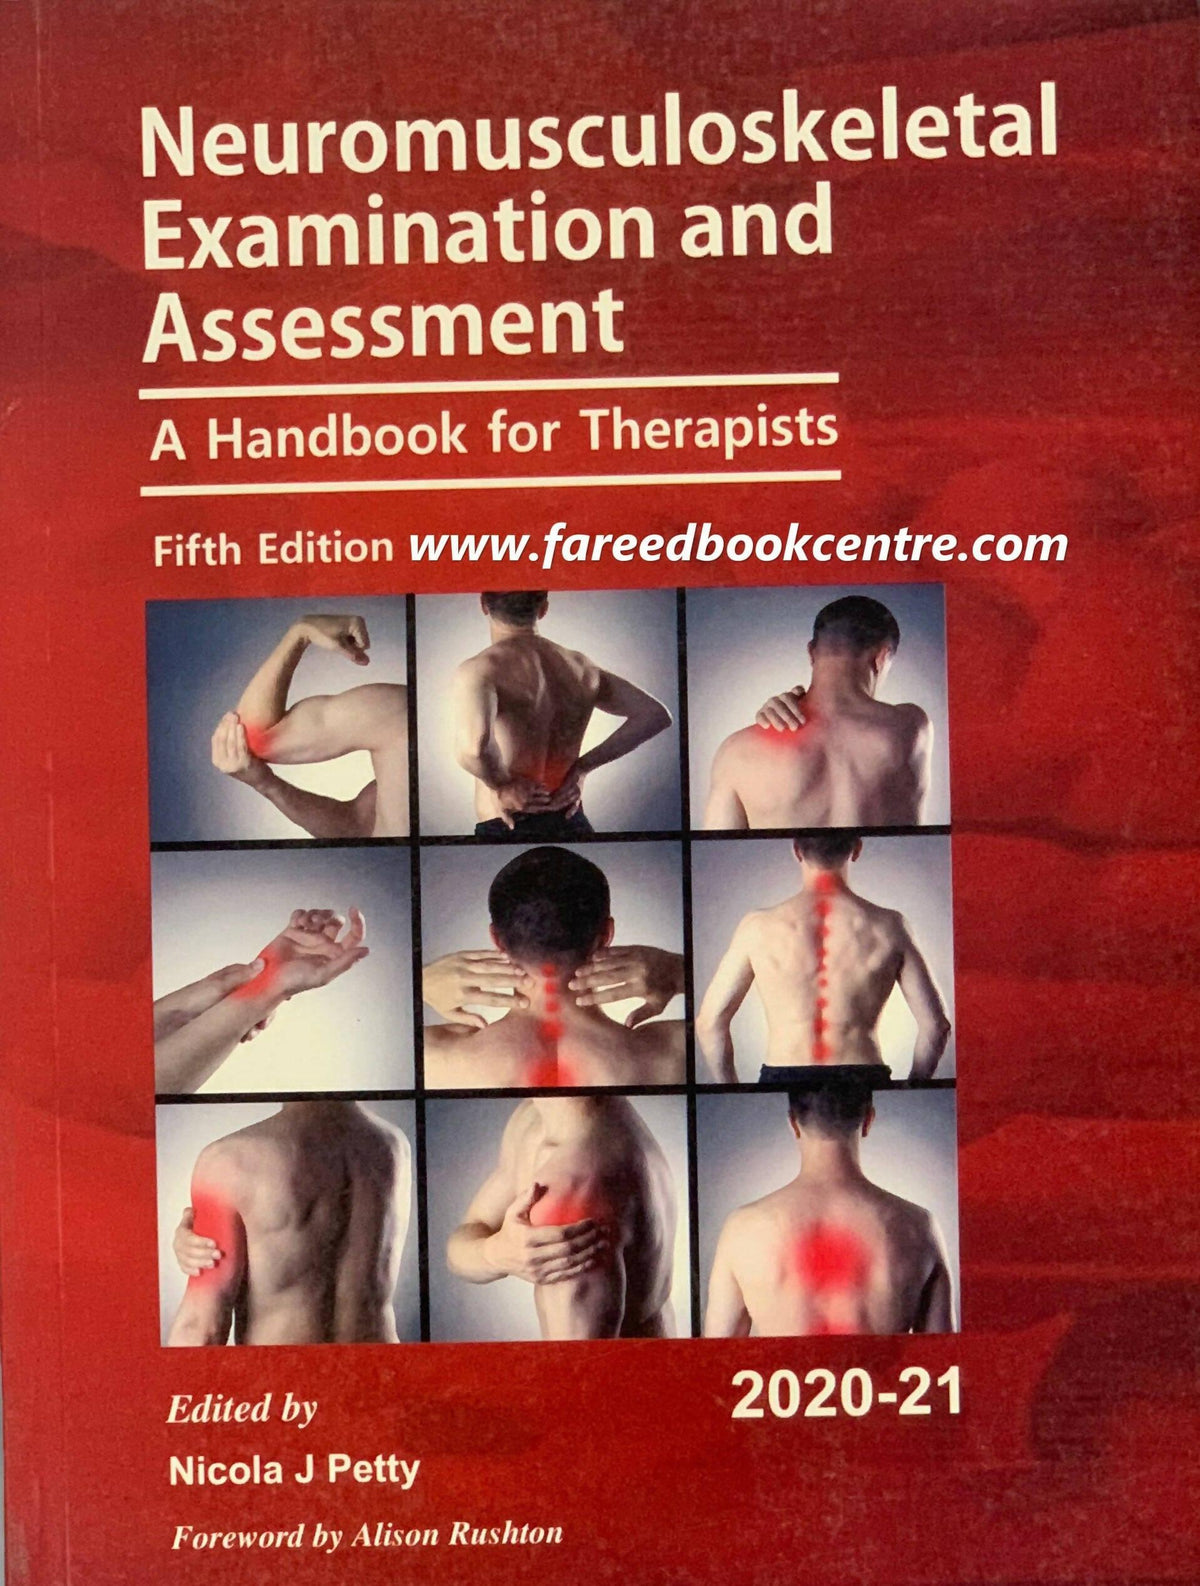 Neuromusculoskeletal Examination And Assessment 5th Edition - ValueBox